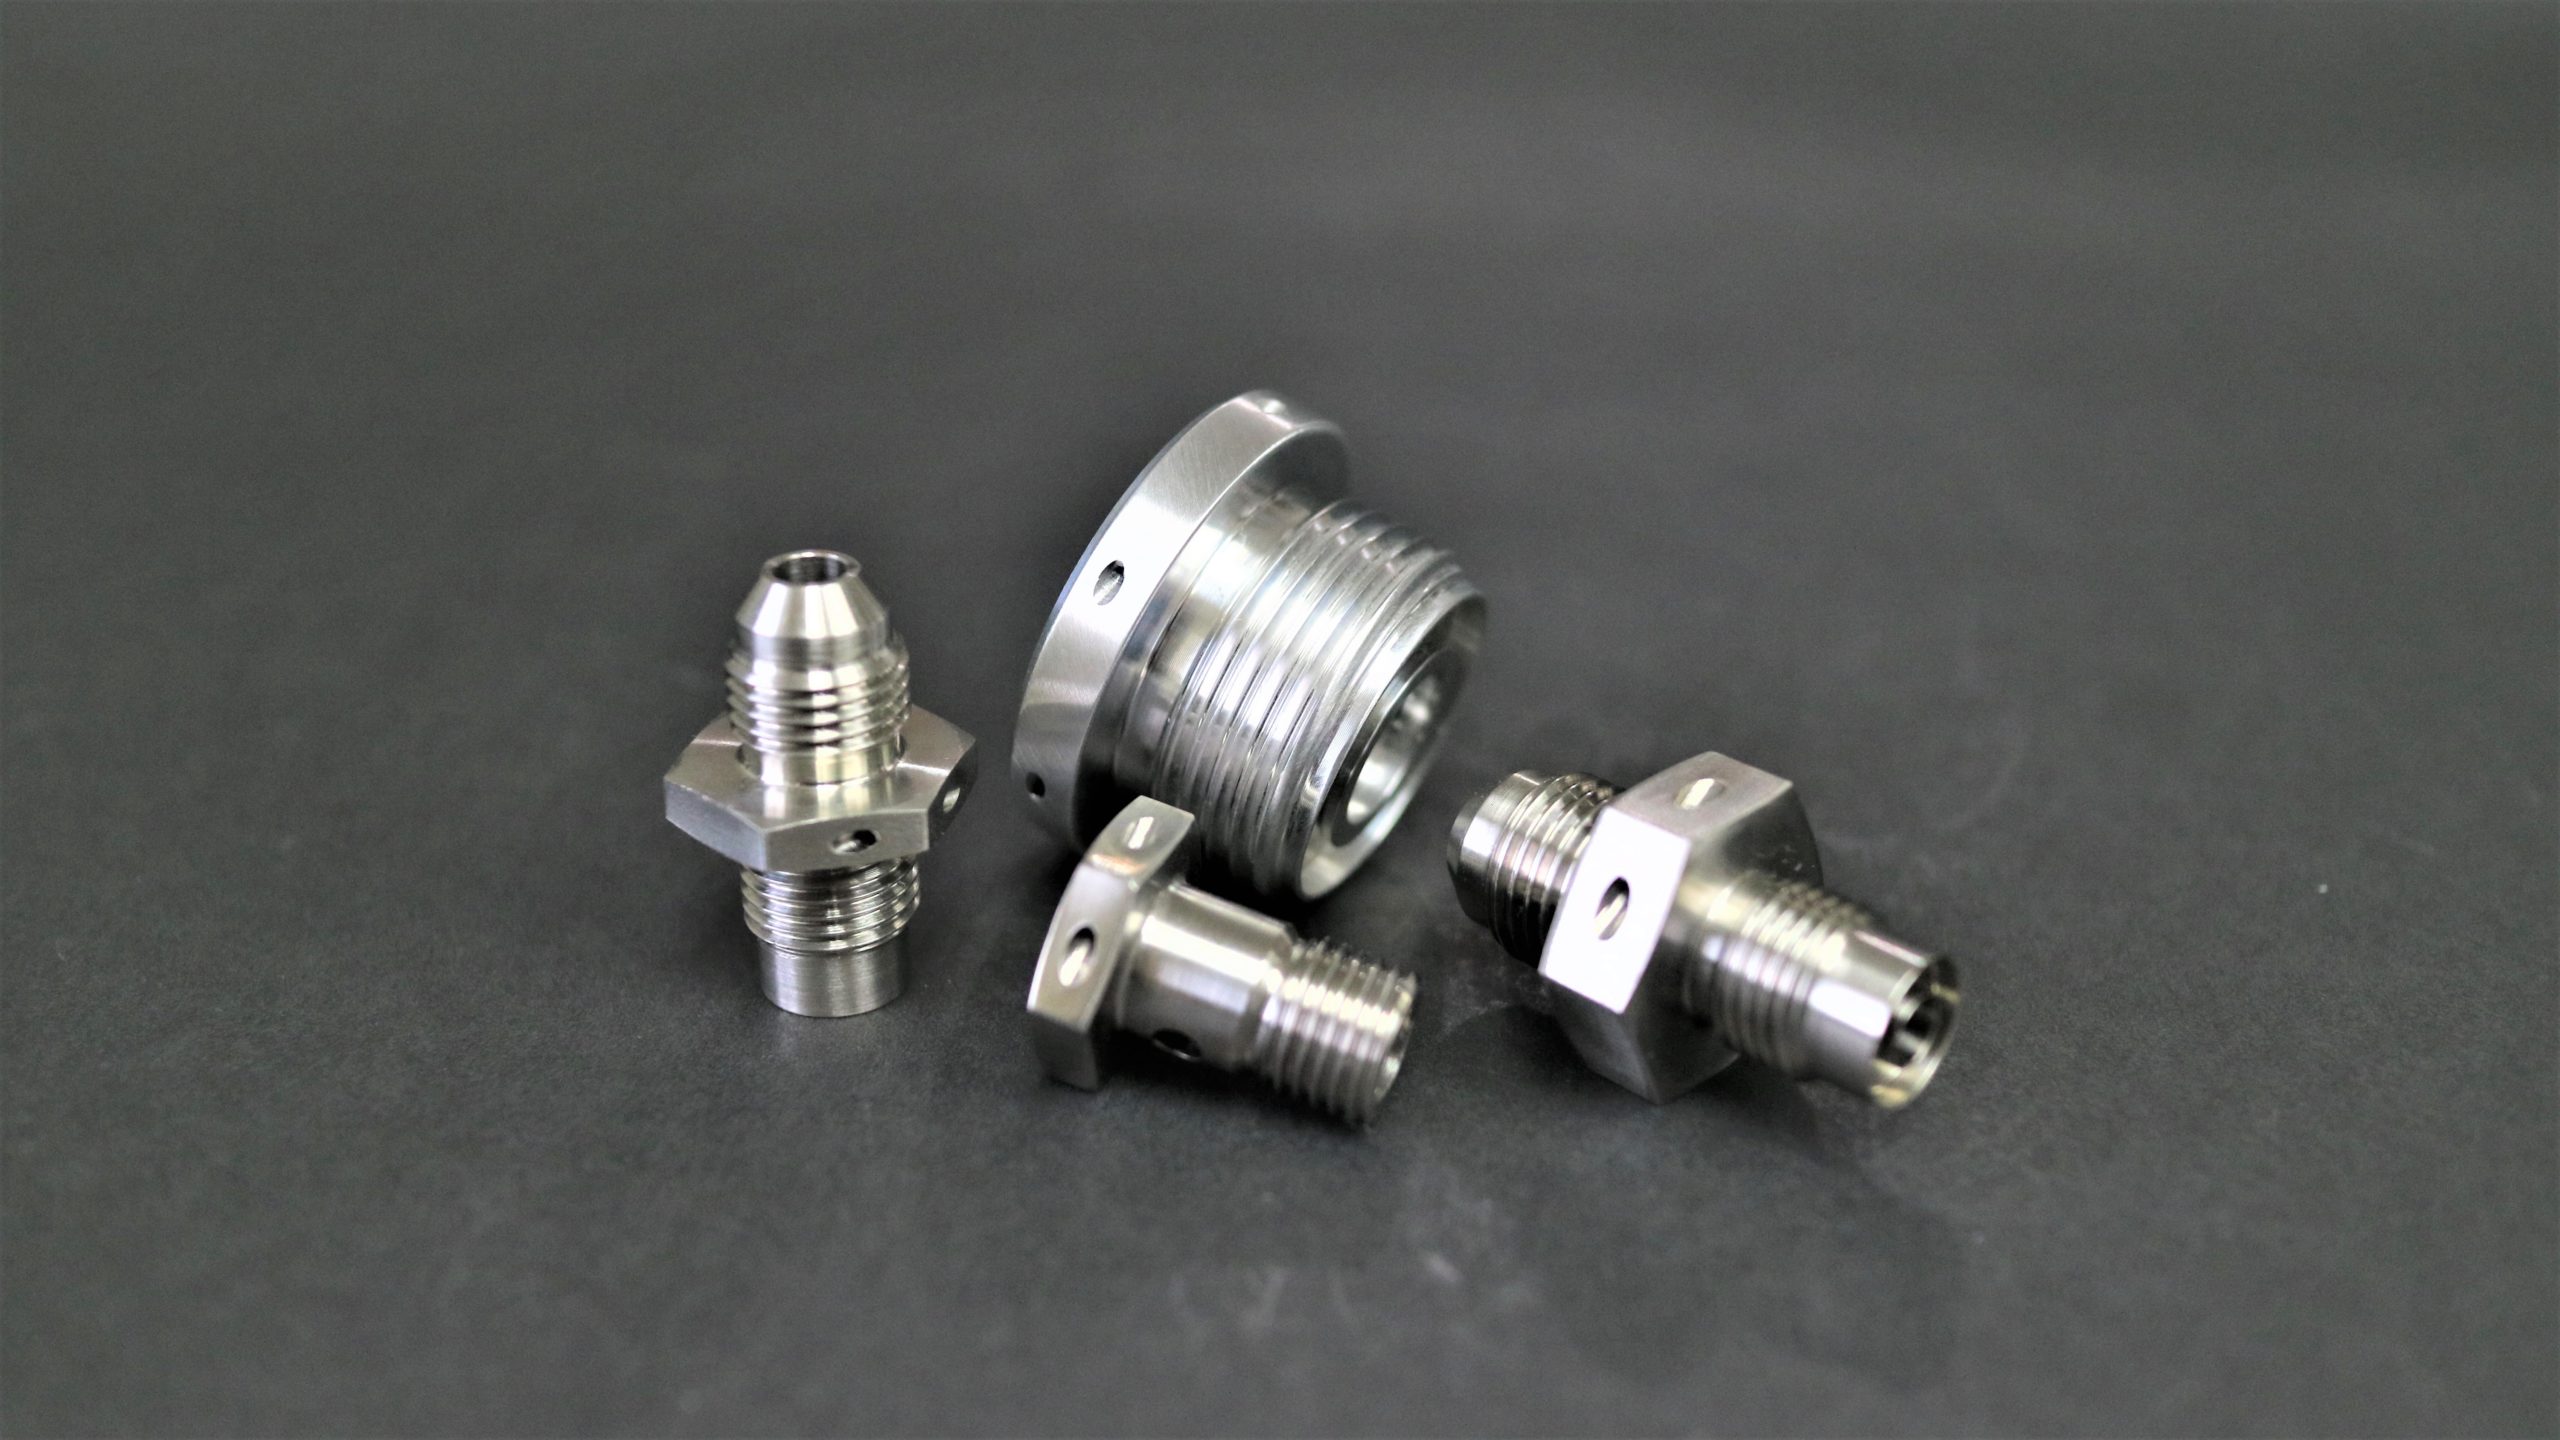 Safety Wire Bolts, Safety Wire Fittings, and Safety Wire Screws.